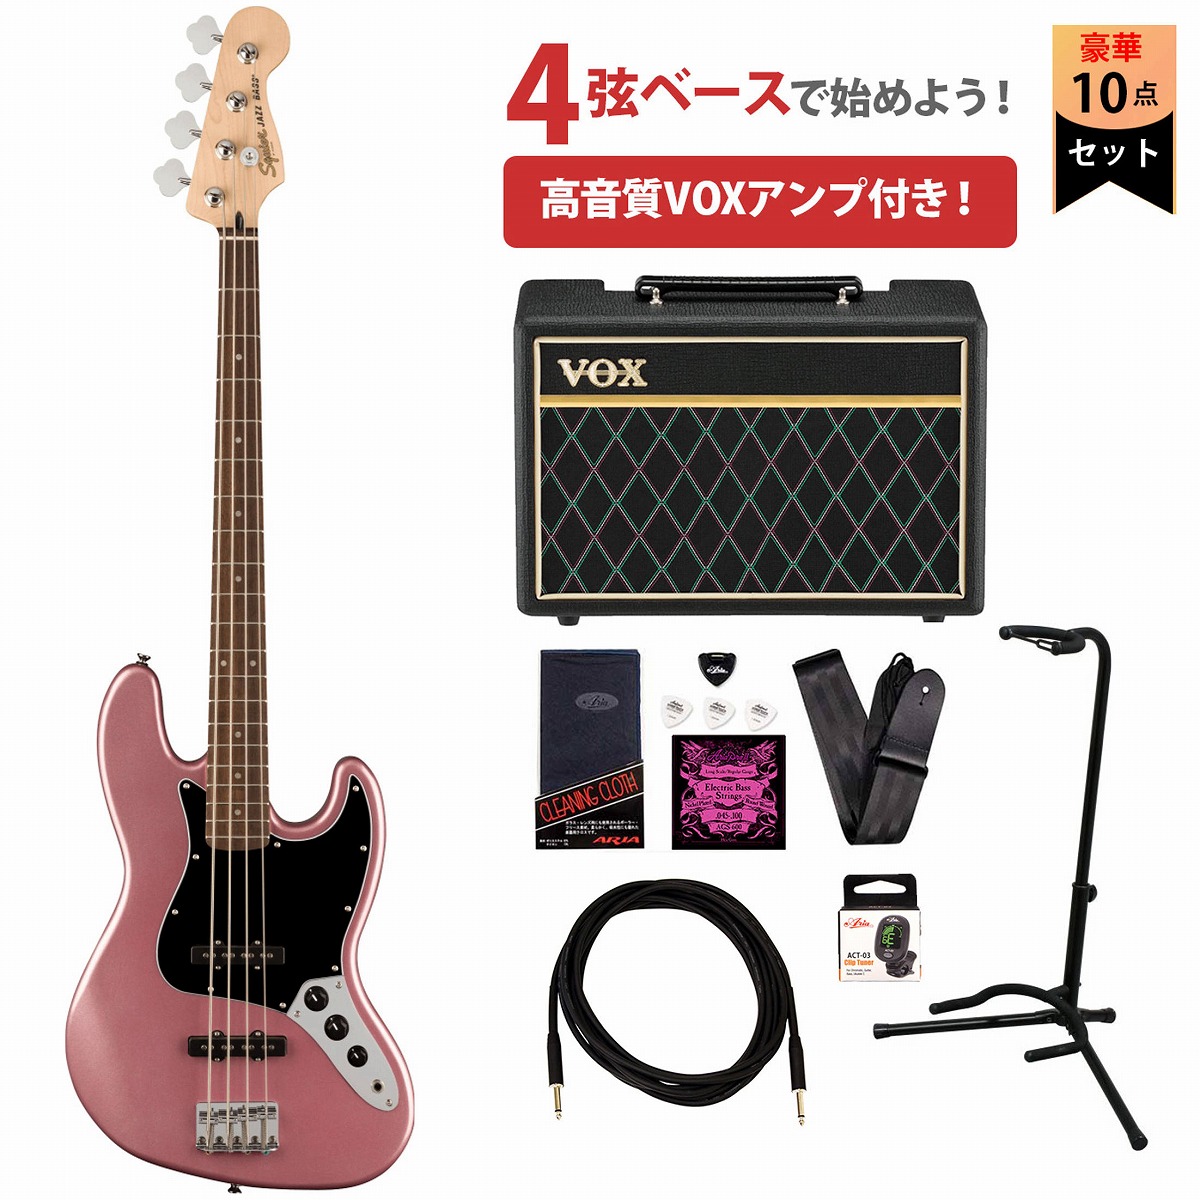 Squier by Fender / Affinity Series Jazz Bass エレキベース初心者セット